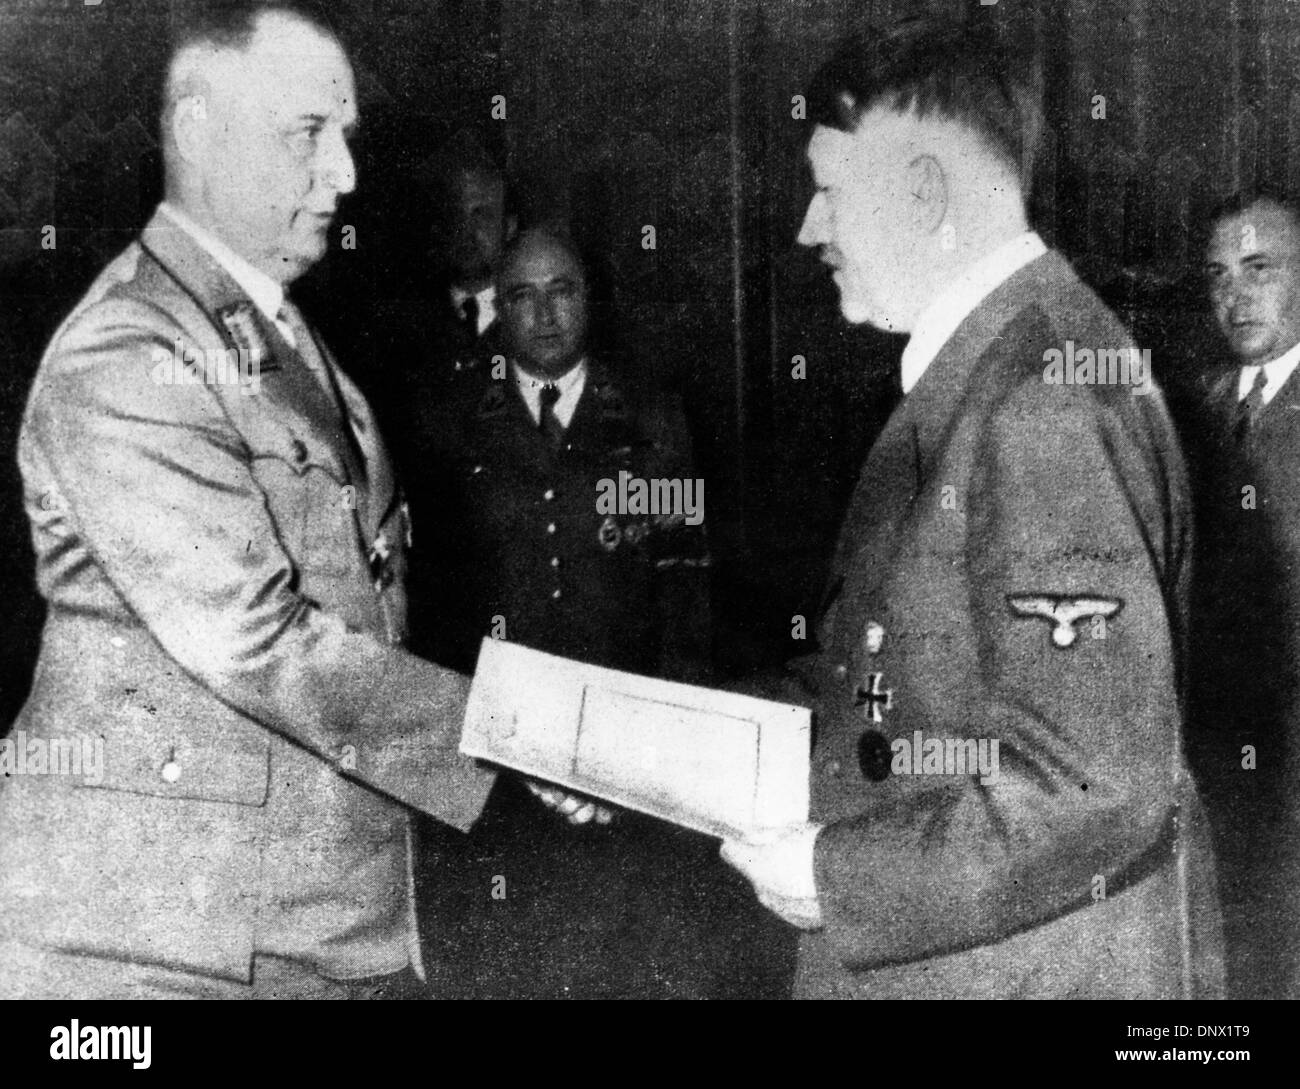 Feb. 18, 1934 - Berlin, Germany - ADOLF HITLER Imperial Chancellor of Germany and the leader of the Nazi Party and PAUL GIESLER. Adolf Hitler (April 20, 1889ÐApril 30, 1945) was the Fuhrer und Reichskanzler (Leader and Imperial chancellor) of Germany from 1933 to his death. He was leader of the National Socialist German Workers Party (NSDAP), better known as the Nazi Party. At the  Stock Photo